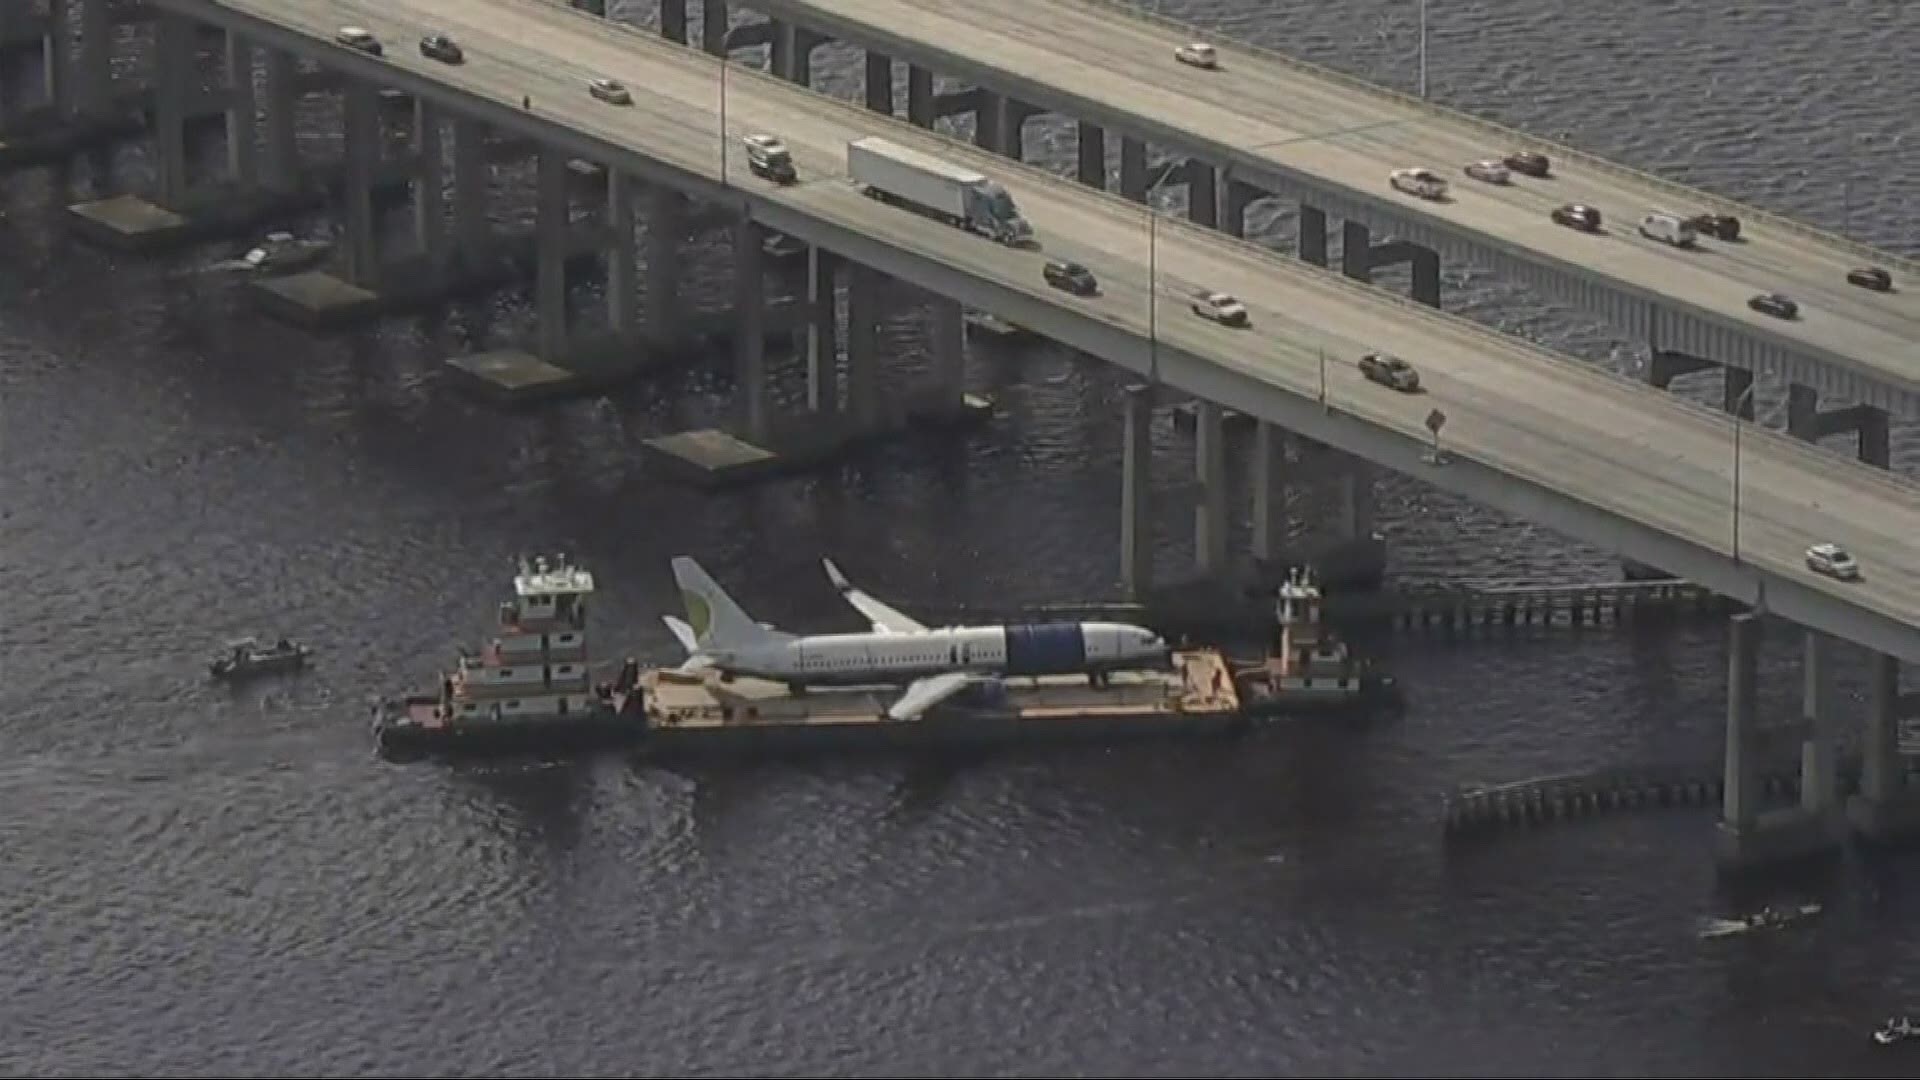 The two tugboats successfully transported the Miami Air plane under the Buckman Bridge on Wednesday.